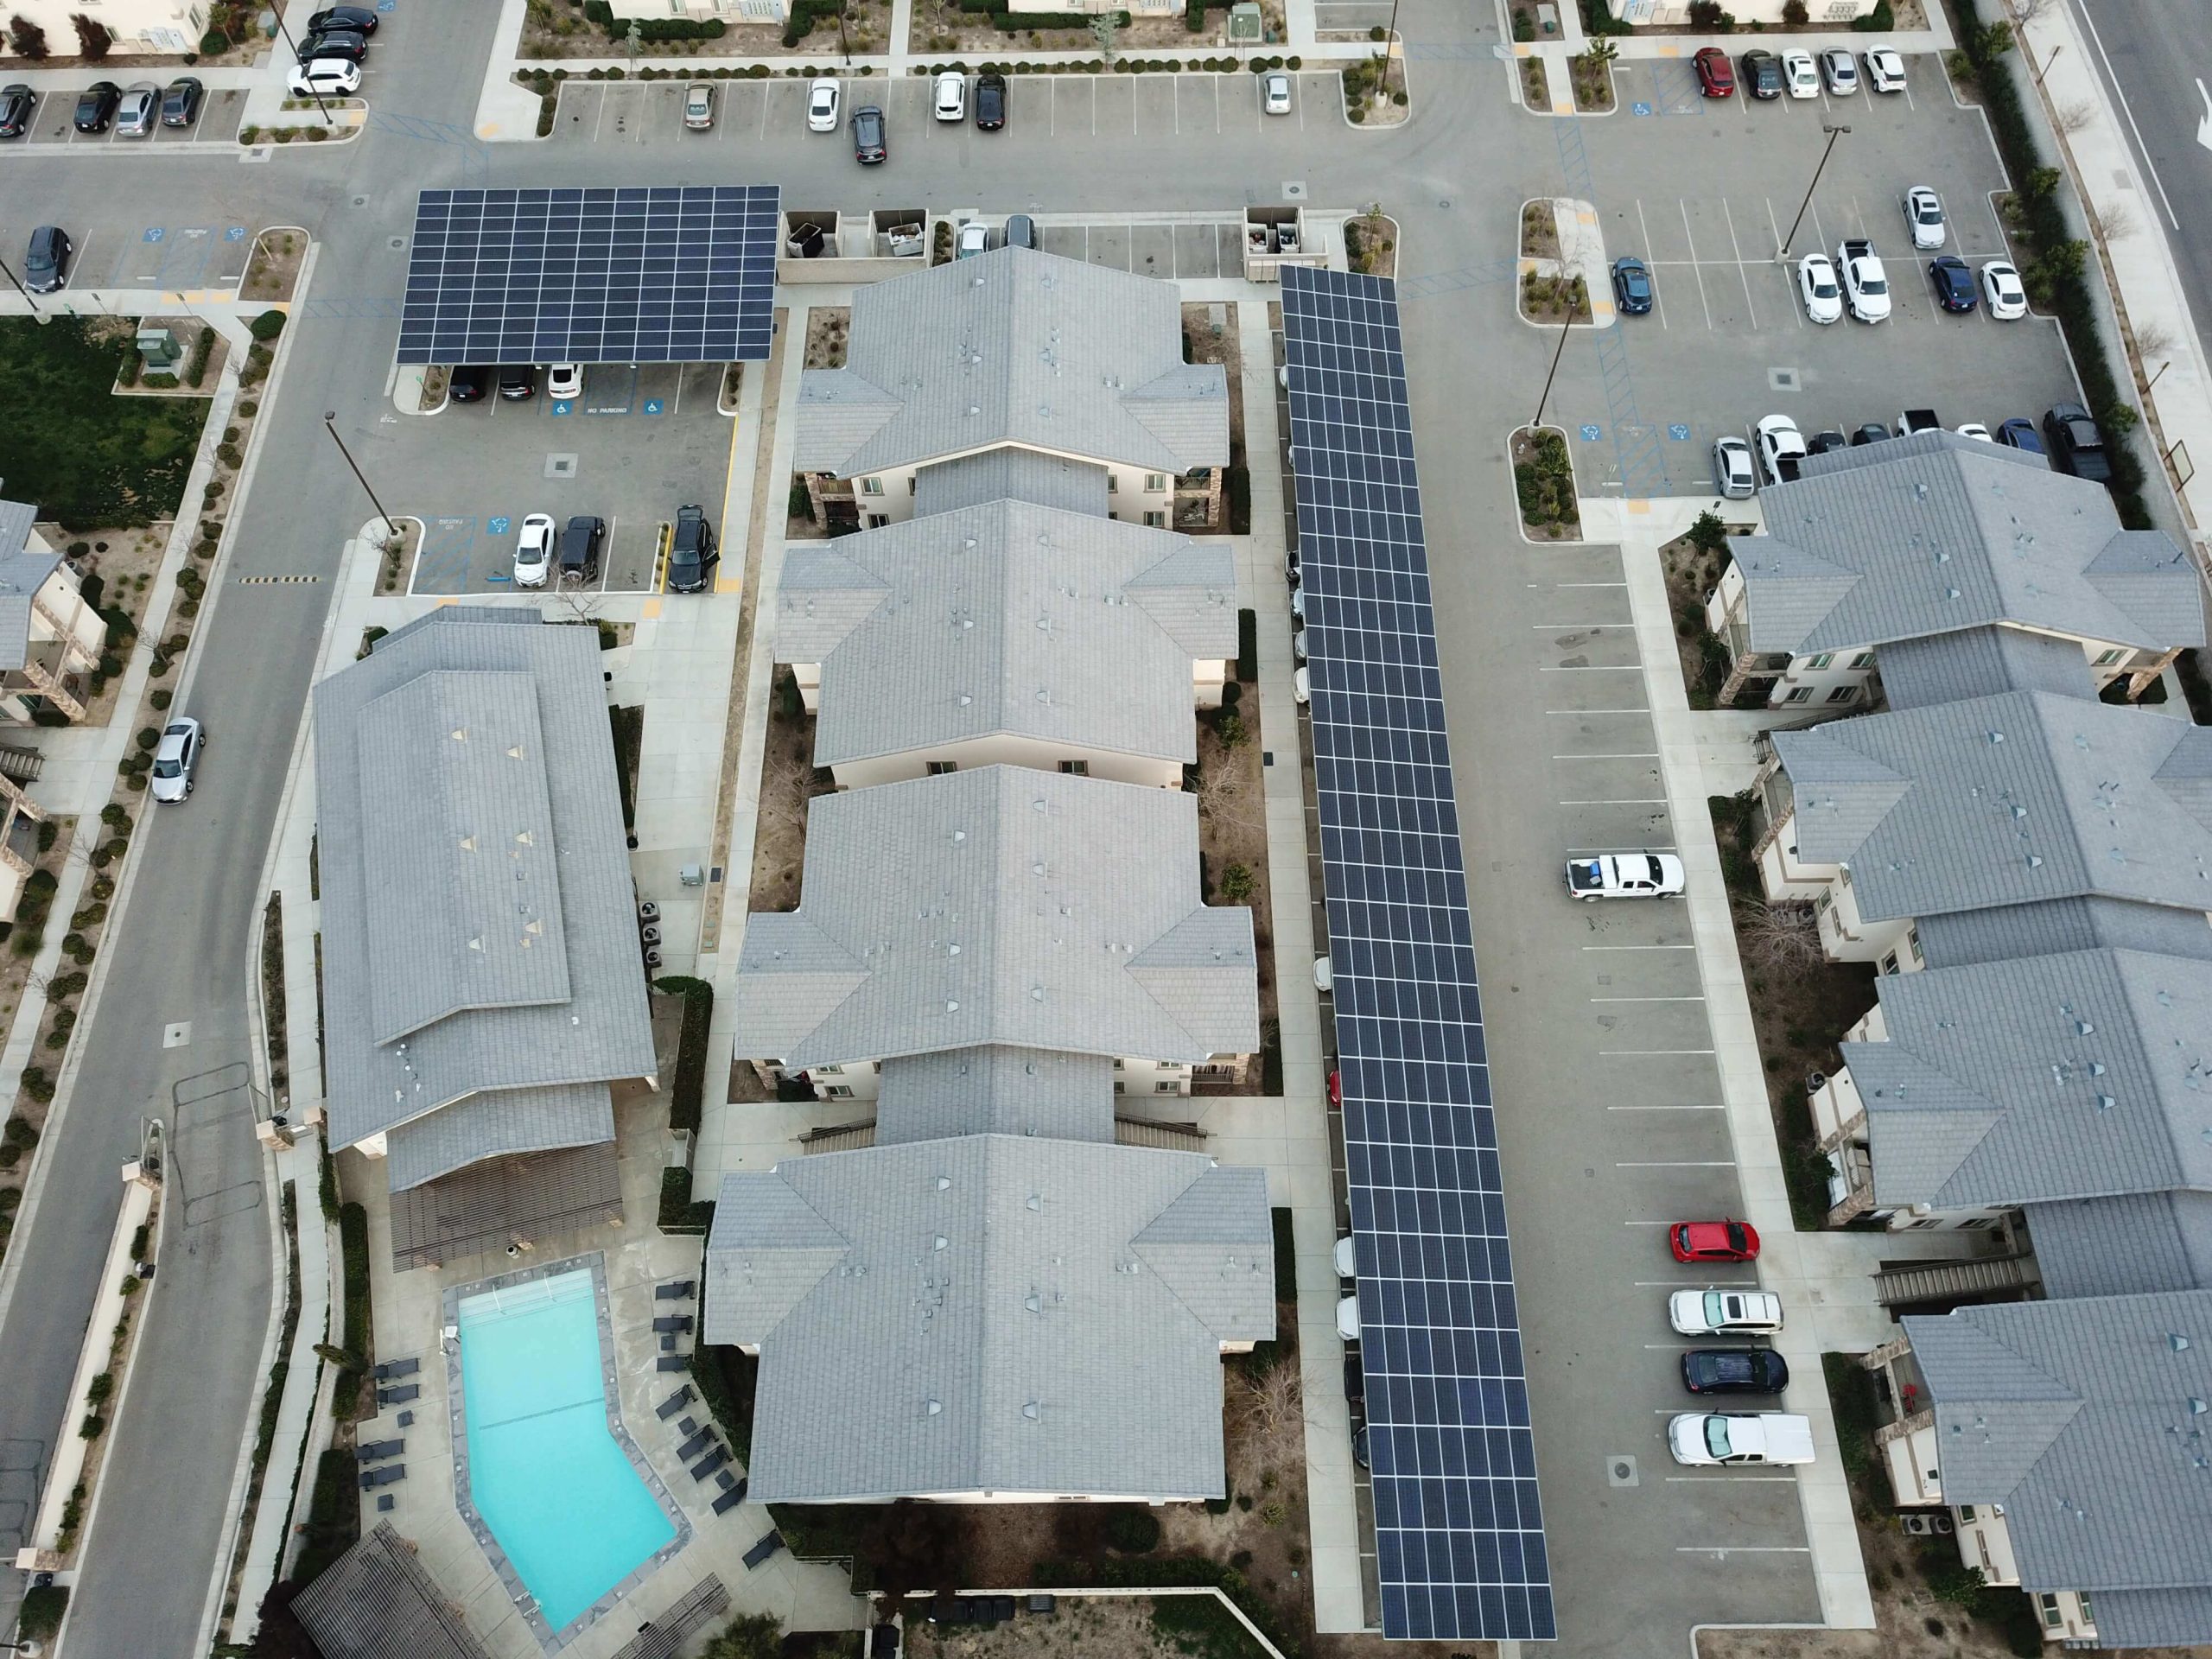 BPi-Solar-Energy-Project-Sablewood-Gardens-Multifamily-Apartments-Front-View-Drone-Photo-2